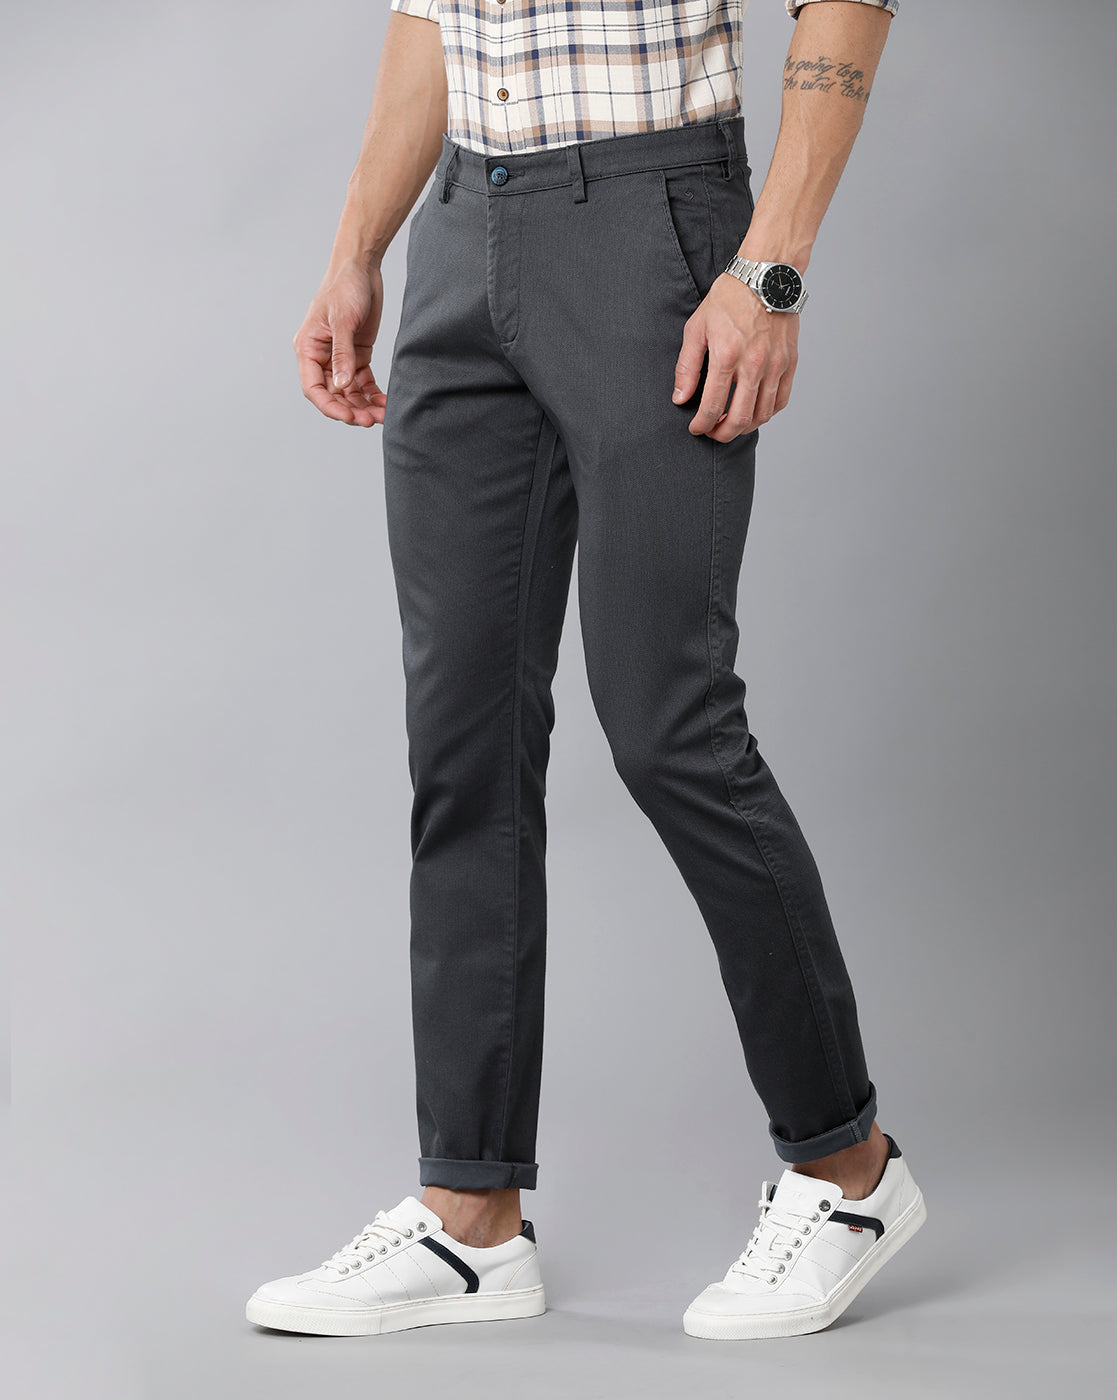 Classic Polo Men's 100% Cotton Moderate Fit Solid Grey Color Trouser | TO1-36 C-GRY